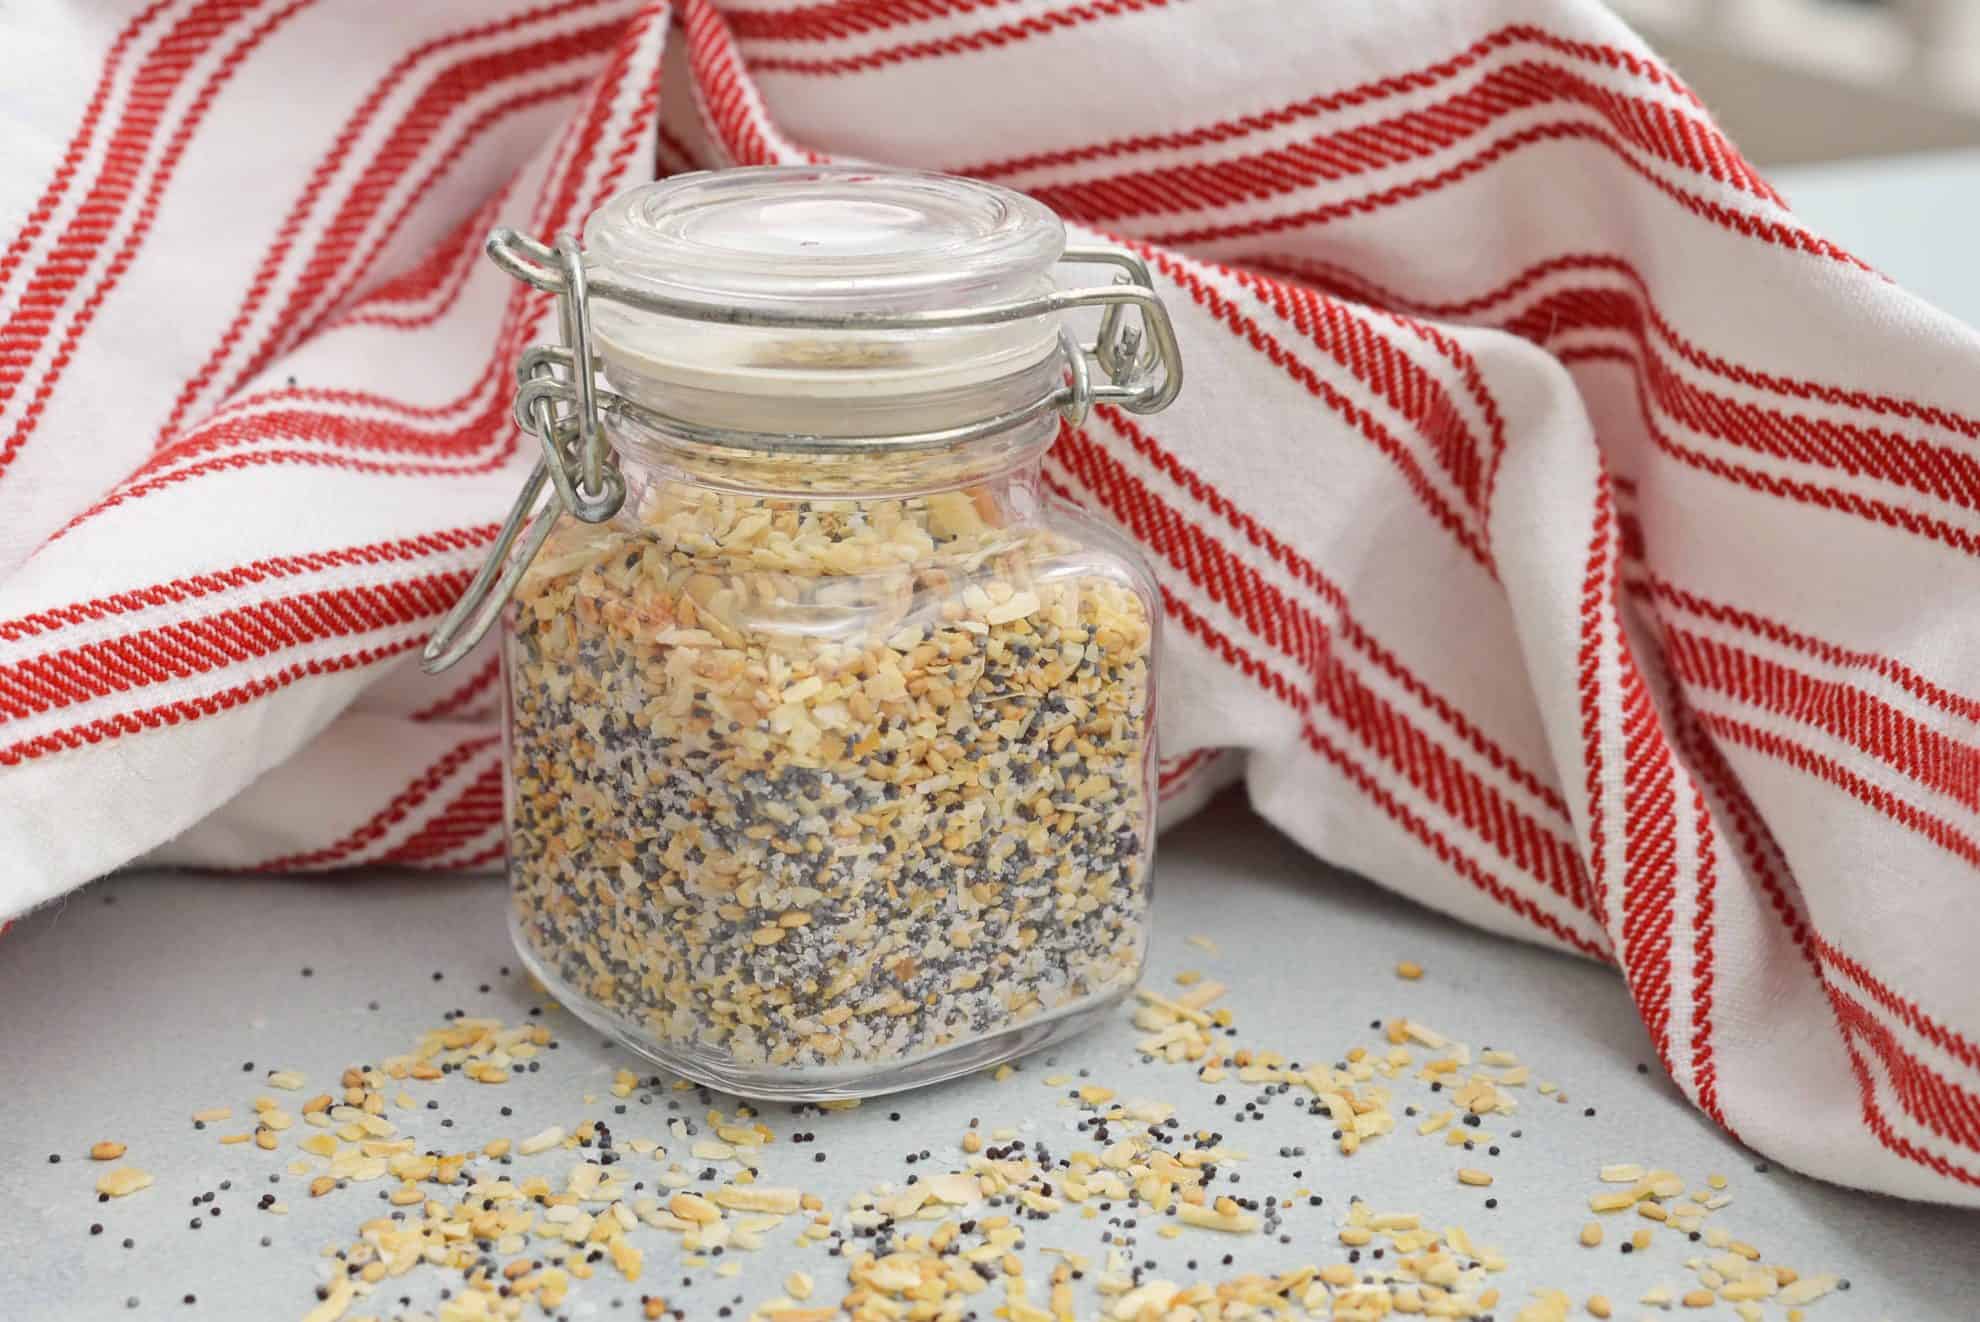 Everything Bagel Seasoning is all of the flavor and goodness of the everything bagel spices so you can sprinkle it on anything! Five ingredients you already have in your pantry. #everythingbagel #everythingbagelseasoning www.savoryexperiments.com